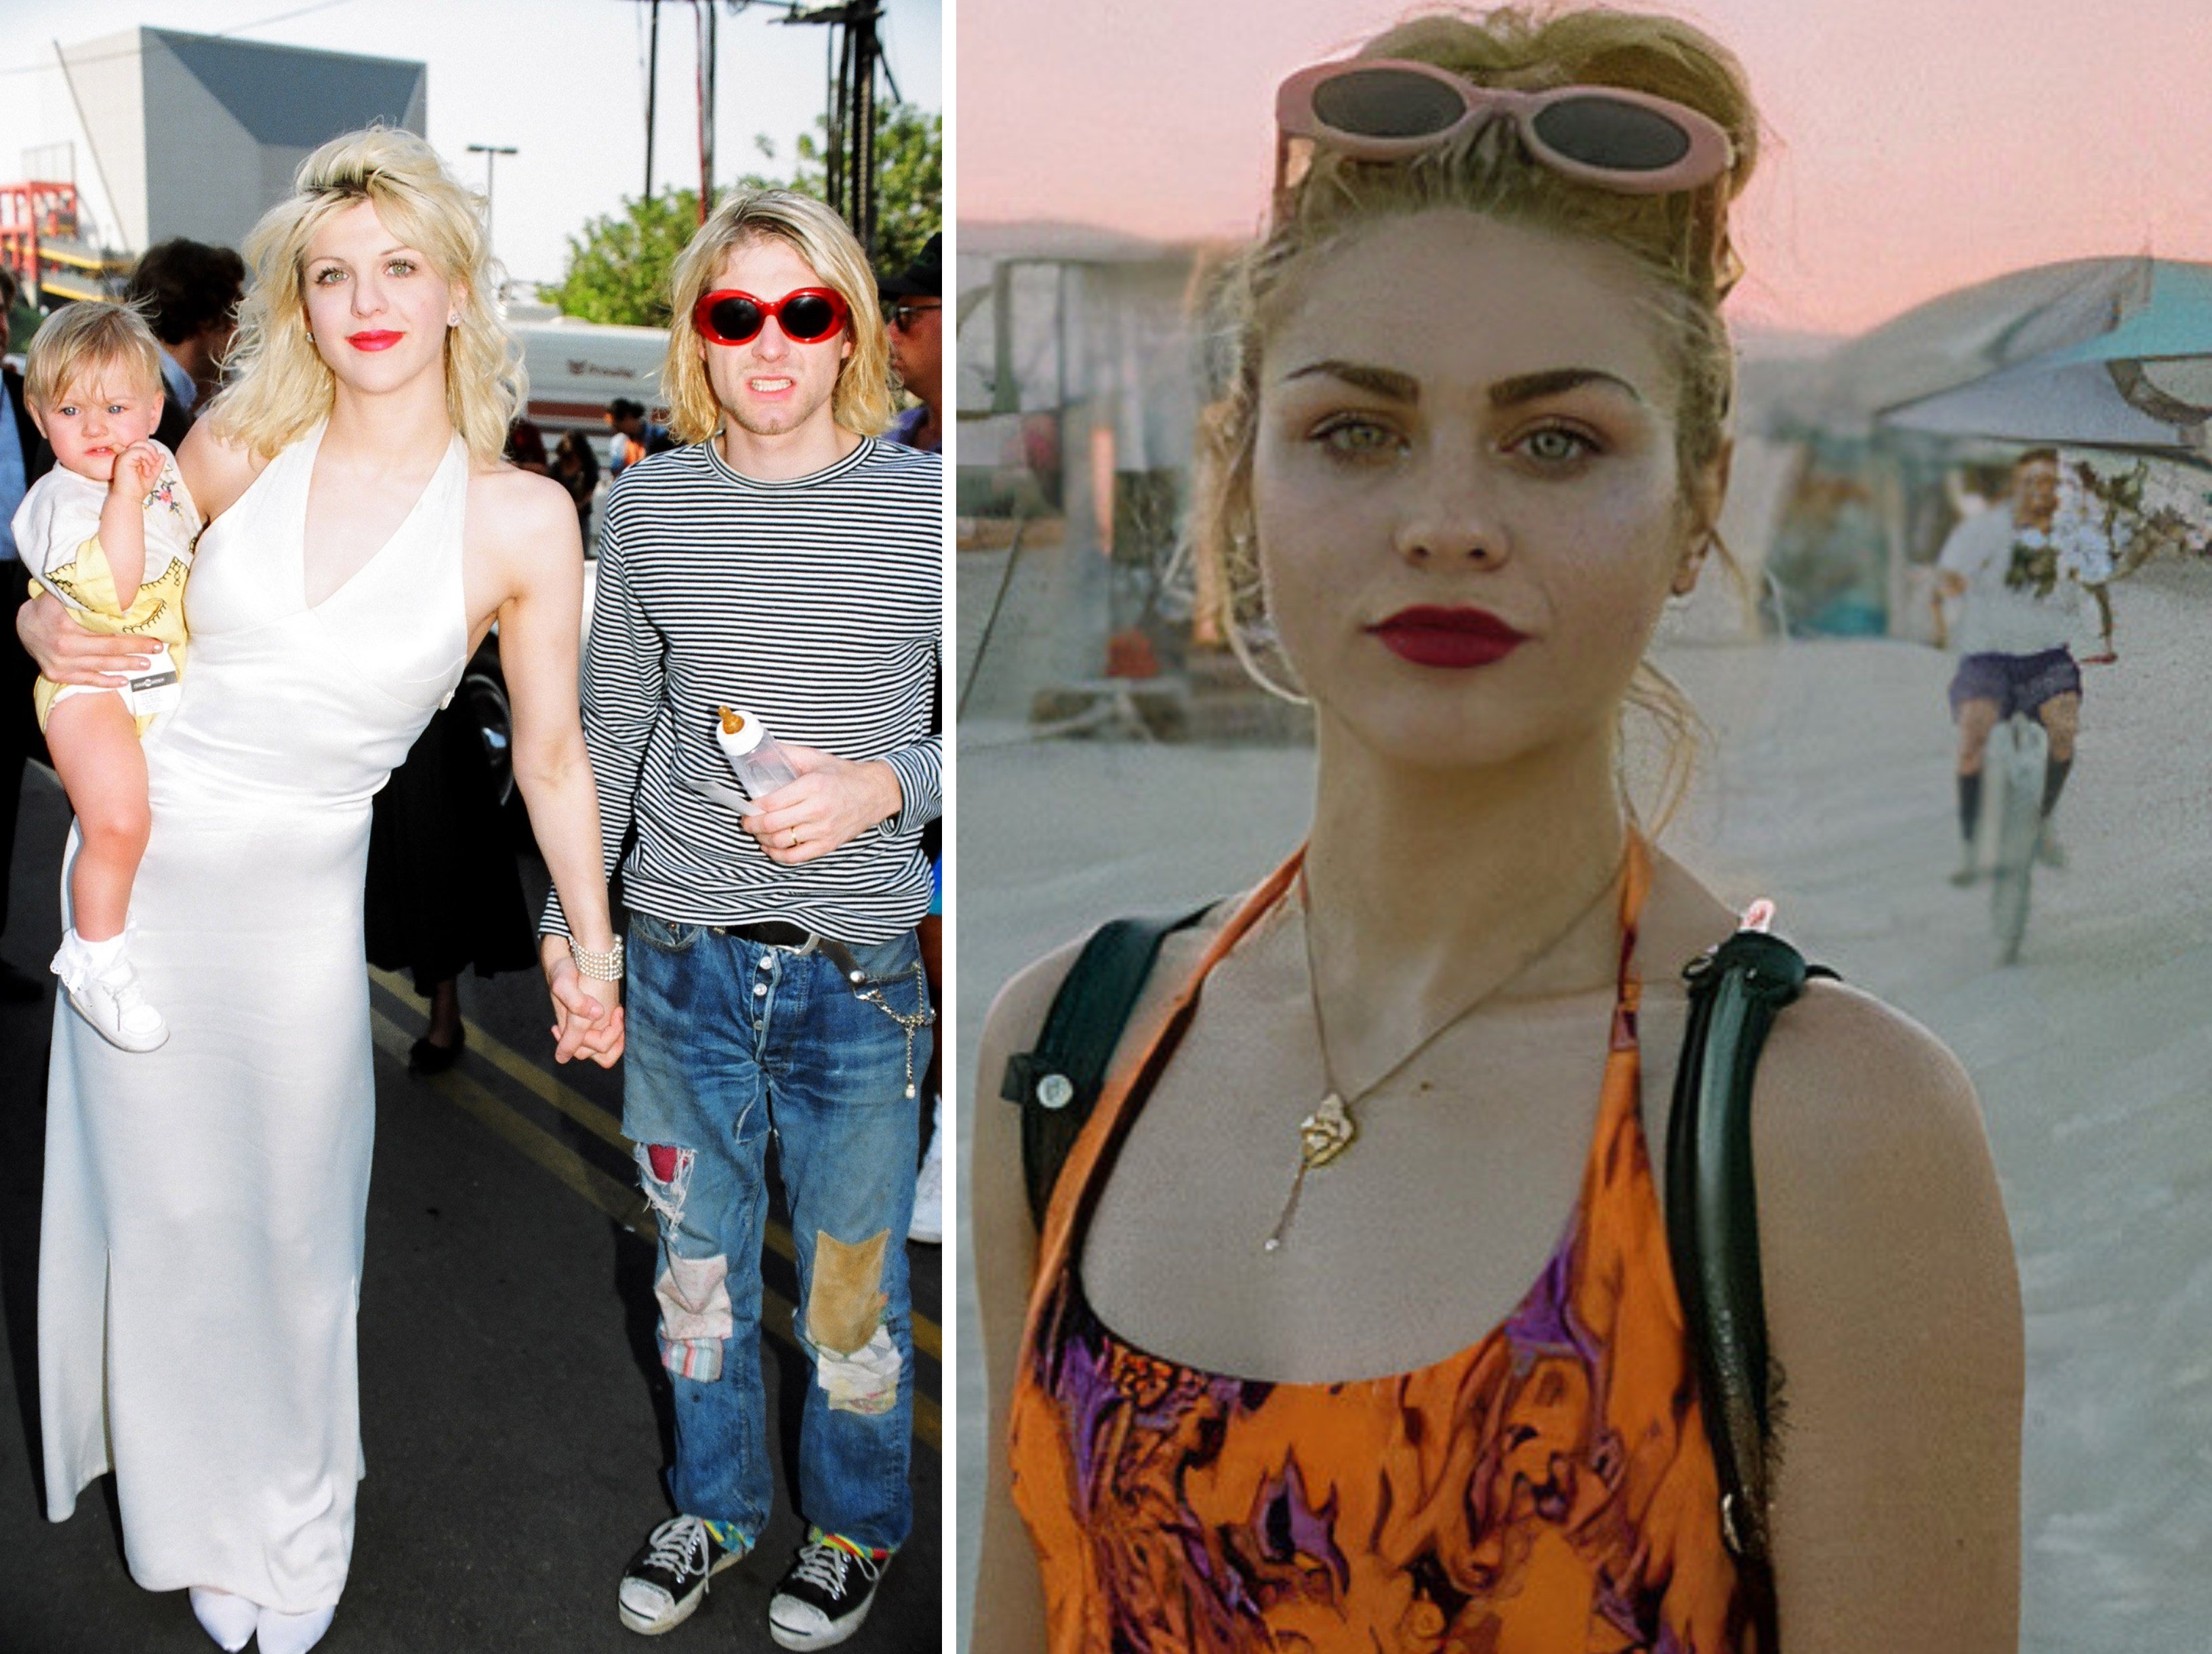 Francis Bean Cobain is the daughter of Kurt Cobain and Courtney Love. Photos: Getty Images, @thespacewitch/Instagram